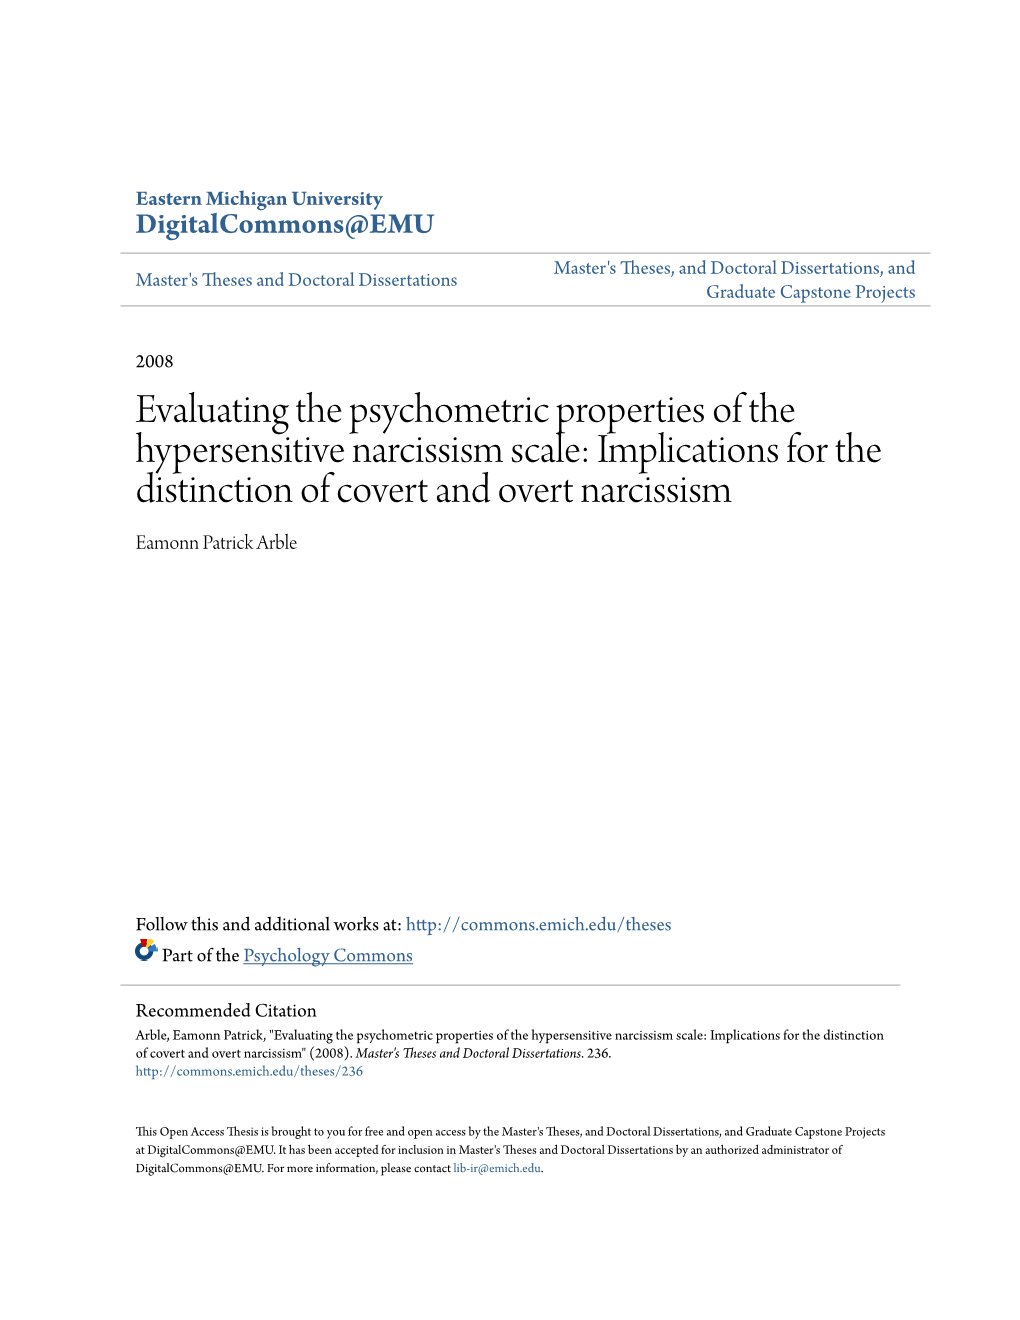 Evaluating the Psychometric Properties of the Hypersensitive Narcissism Scale: Implications for the Distinction of Covert and Overt Narcissism Eamonn Patrick Arble